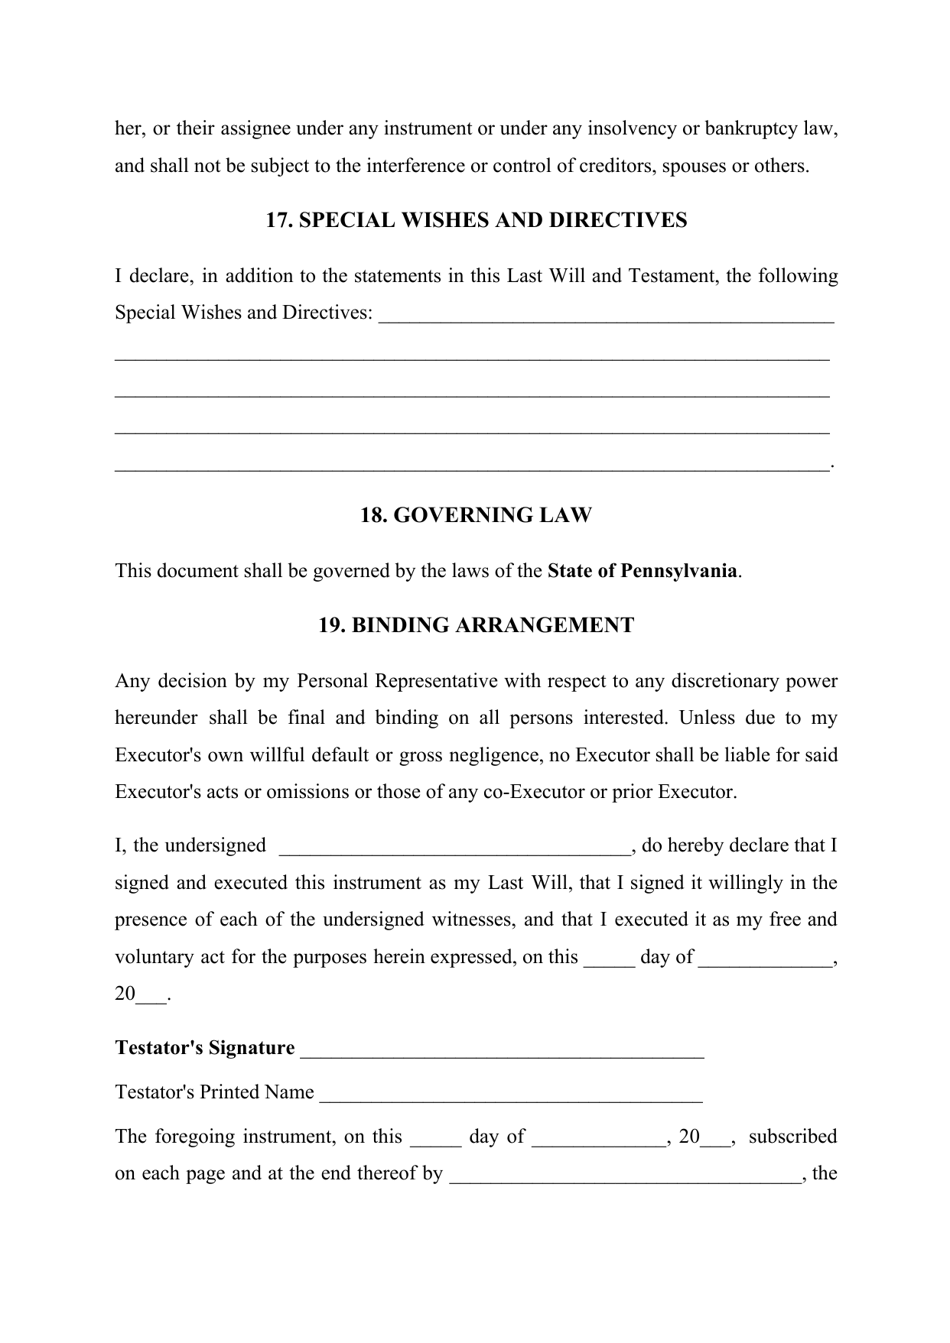 Pennsylvania Last Will and Testament Template Download Printable PDF